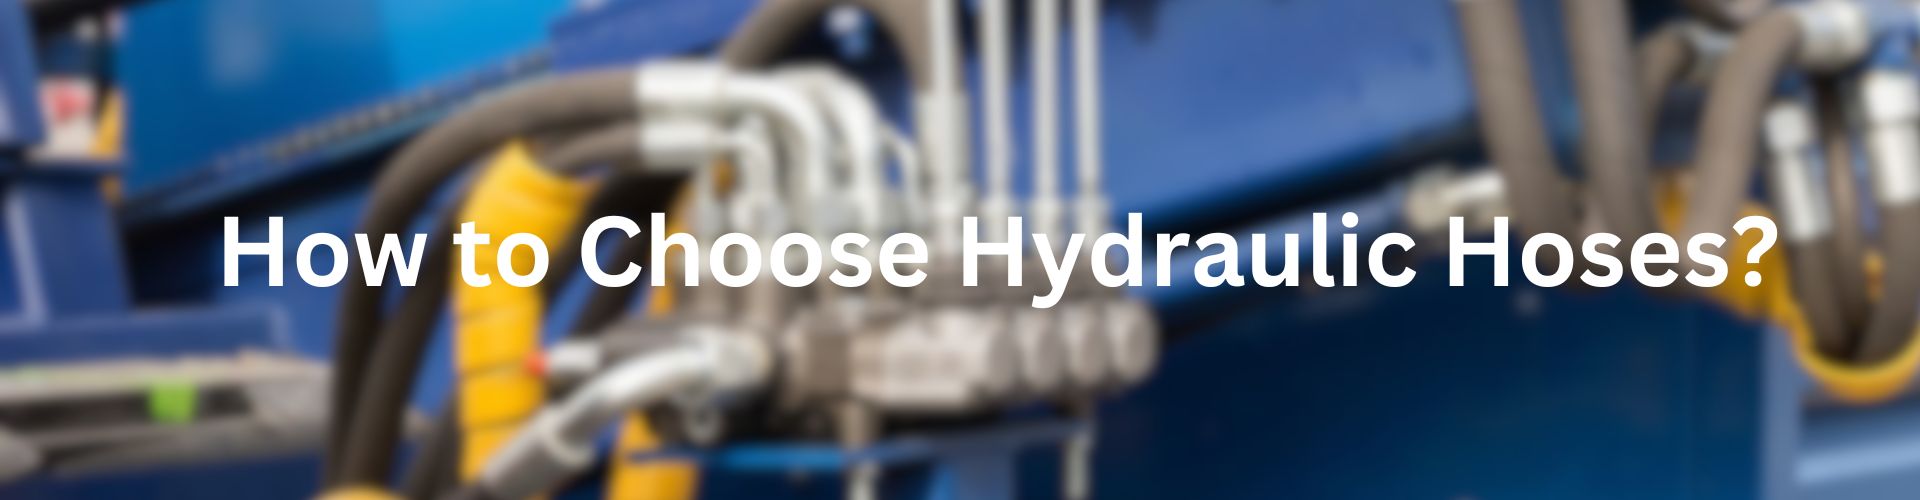 How to Choose Hydraulic Hoses